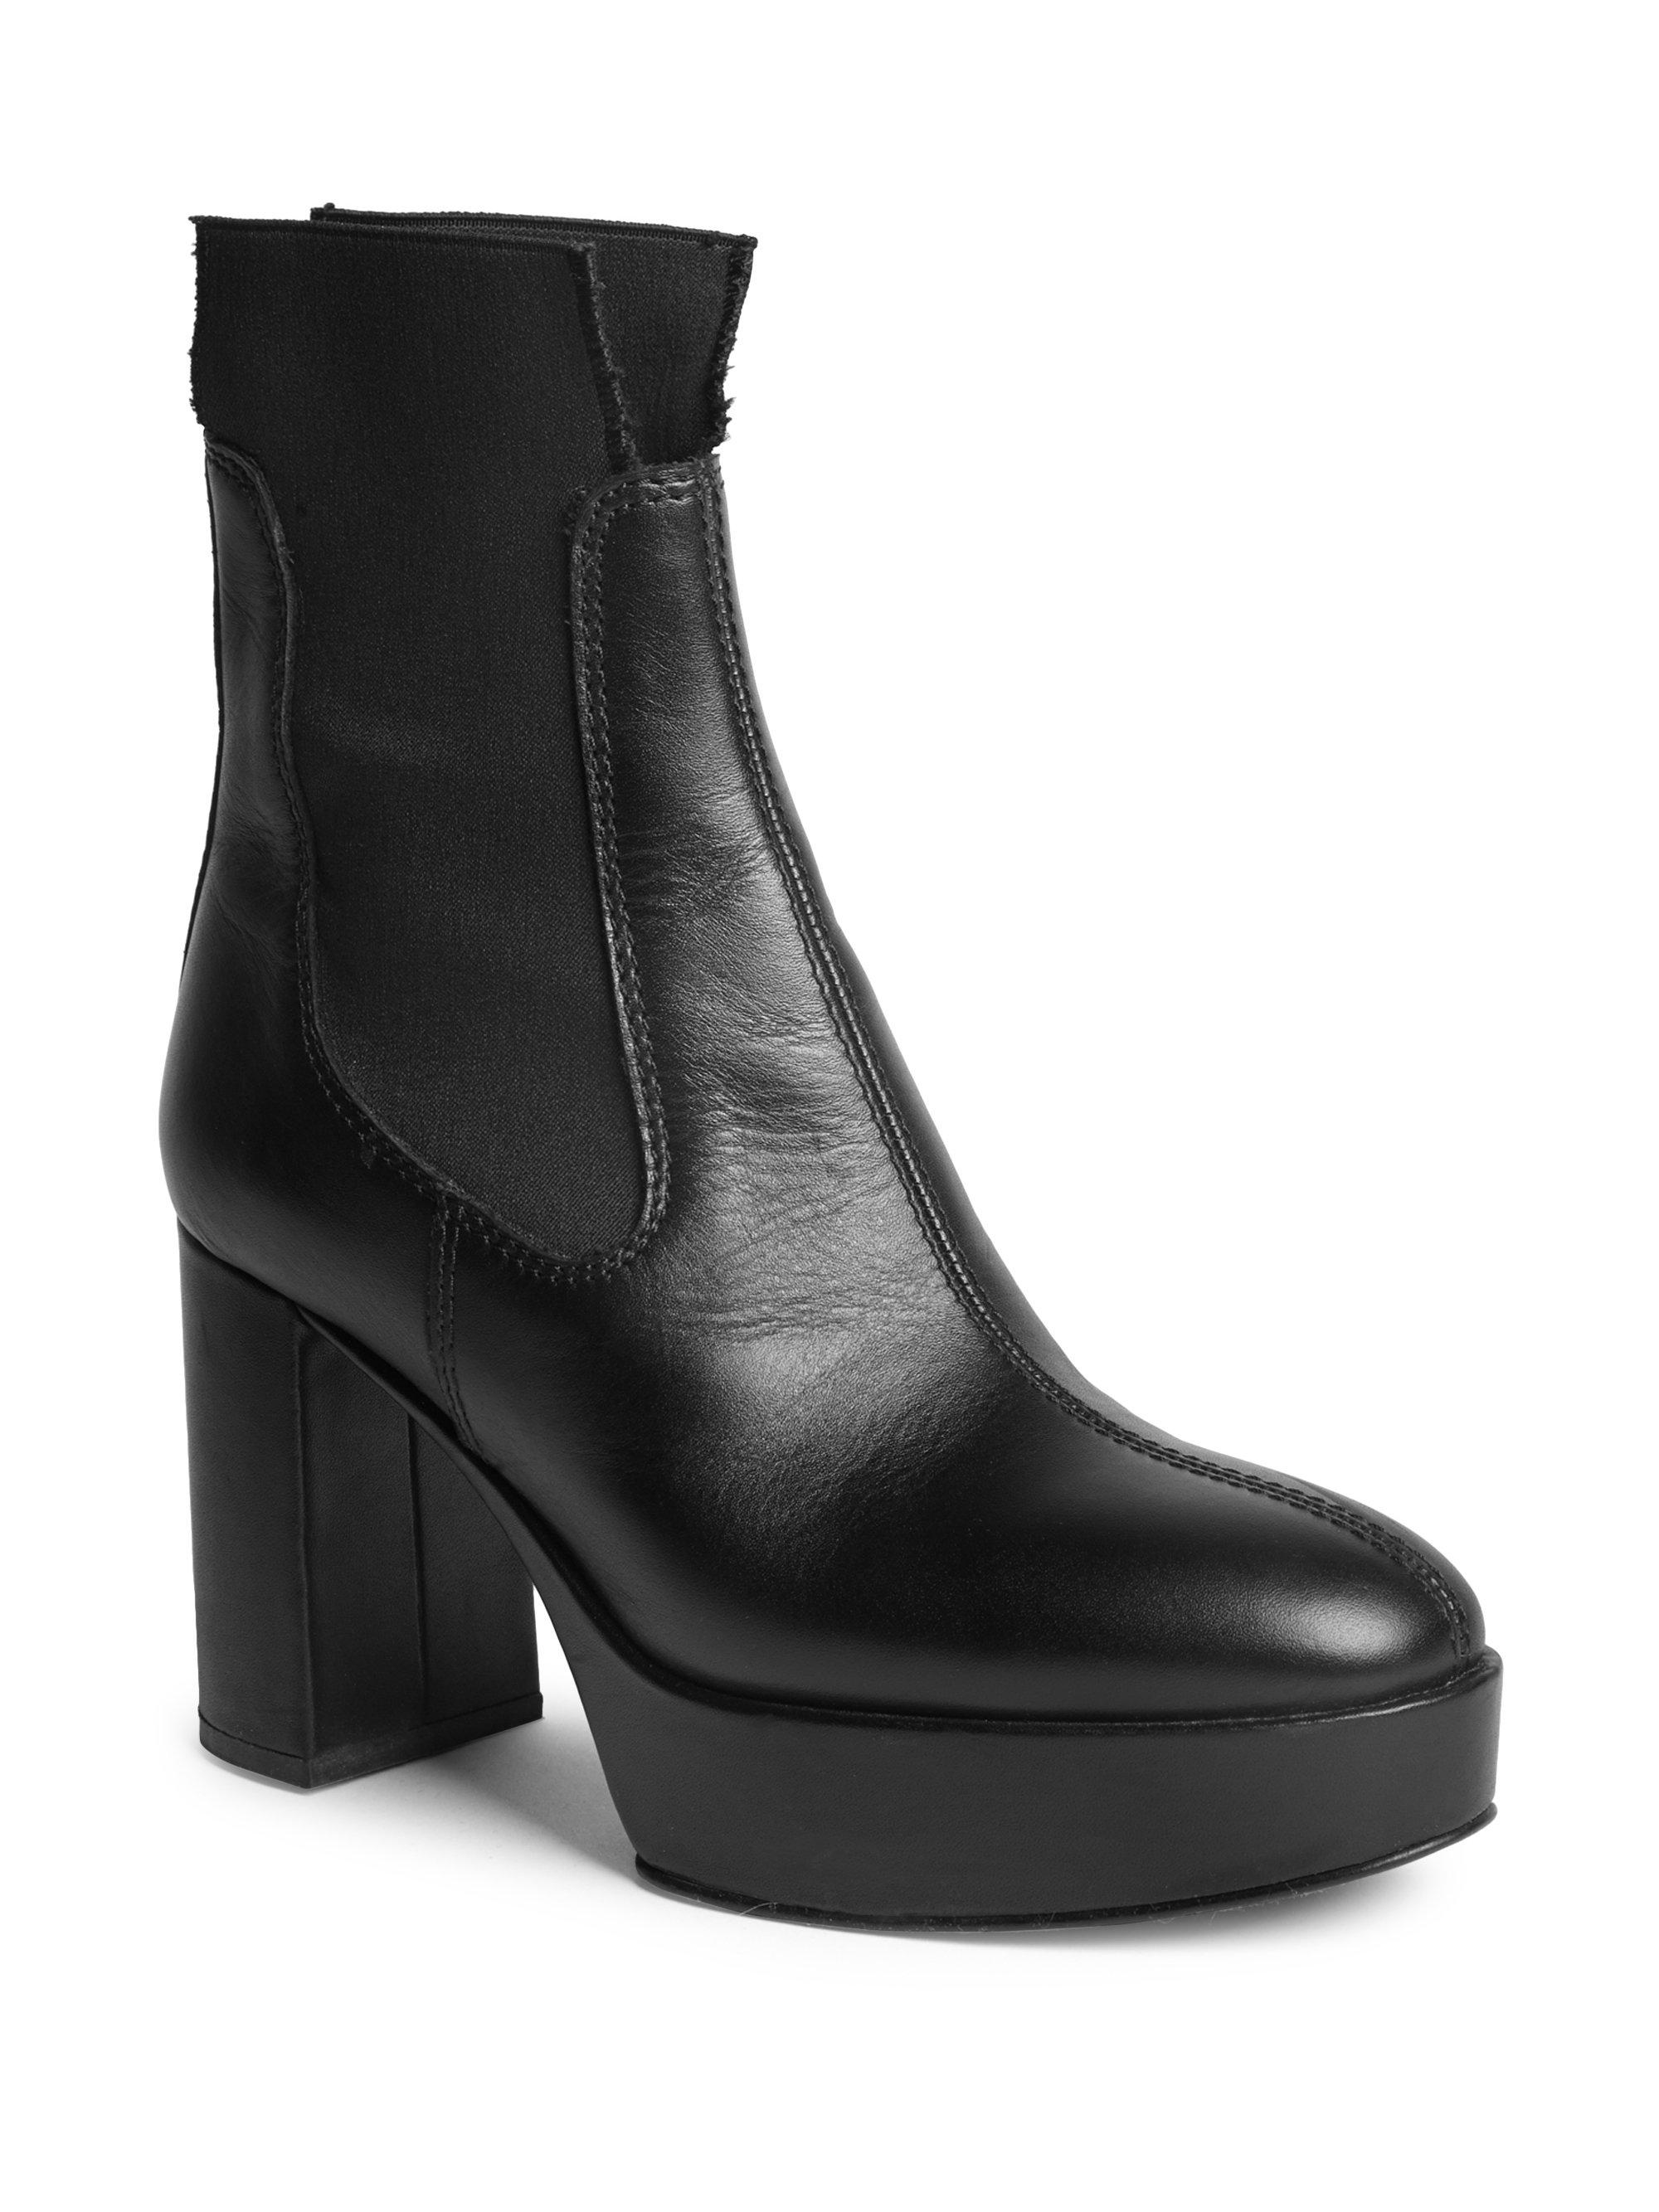 Acne Studios Leather Platform Ankle Boots in Black - Lyst